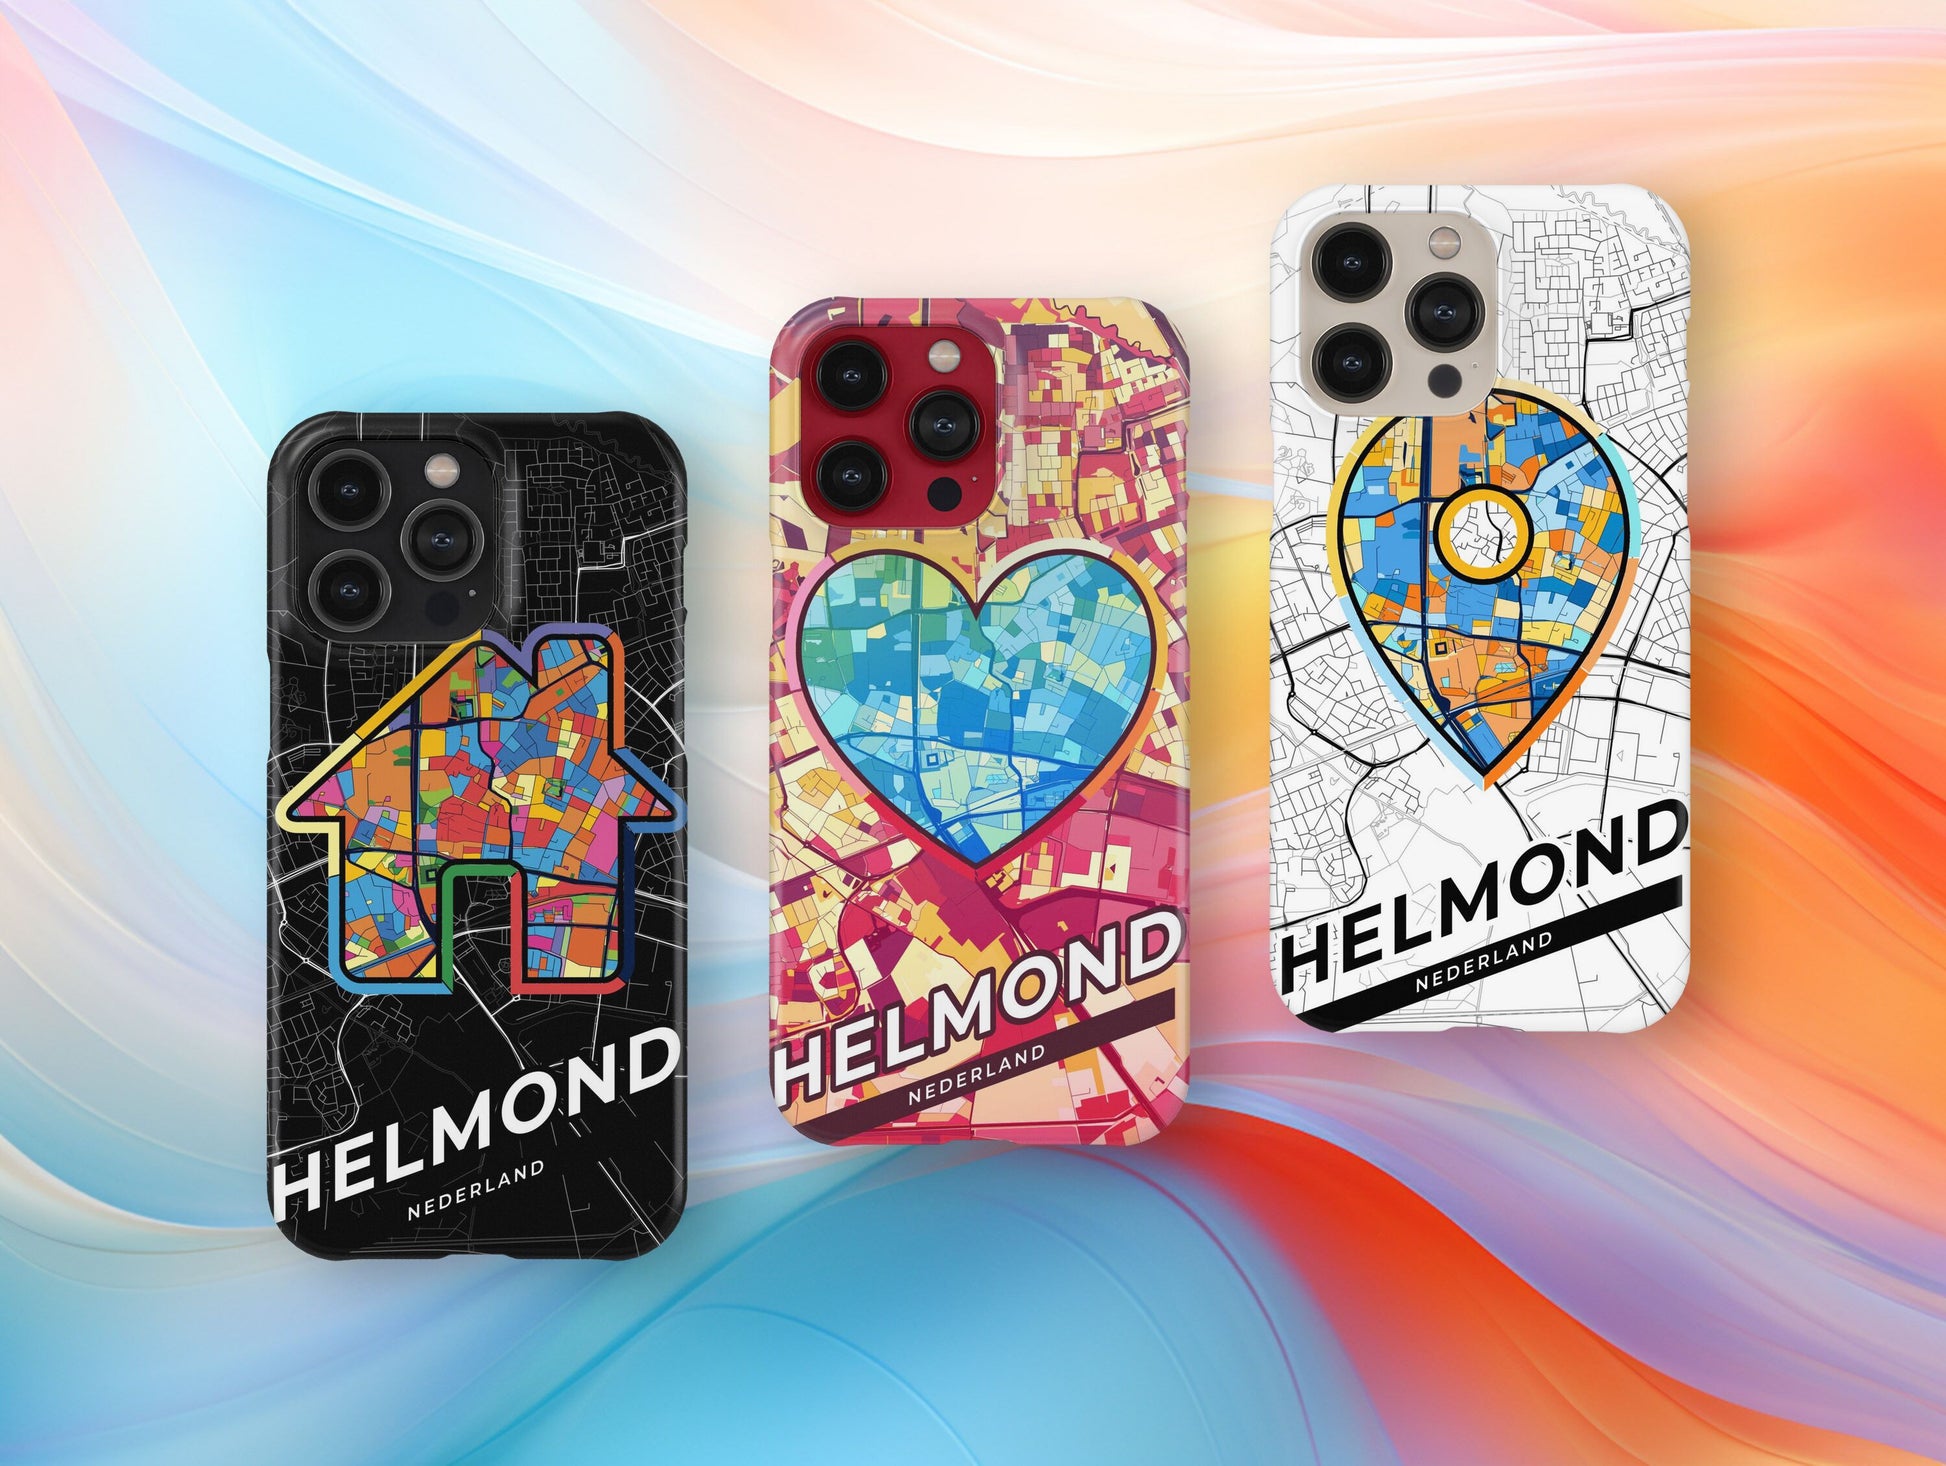 Helmond Netherlands slim phone case with colorful icon. Birthday, wedding or housewarming gift. Couple match cases.